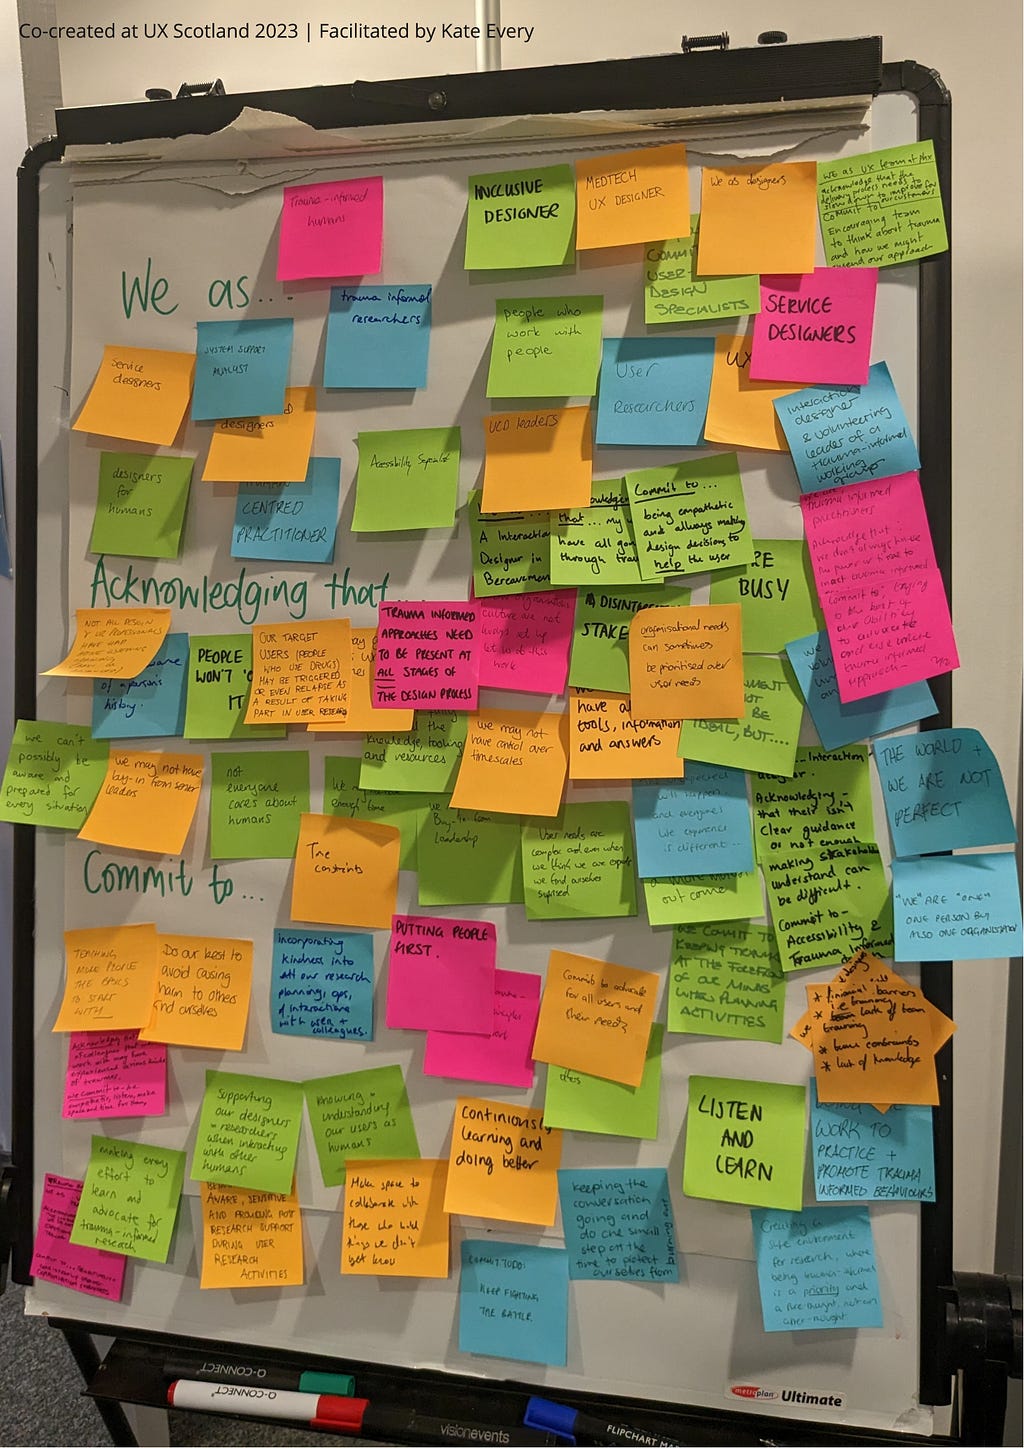 Image of our trauma-informed charter in its original form, as lots of sticky notes on a whiteboard. The text of each sticky note is available at the end of this post.